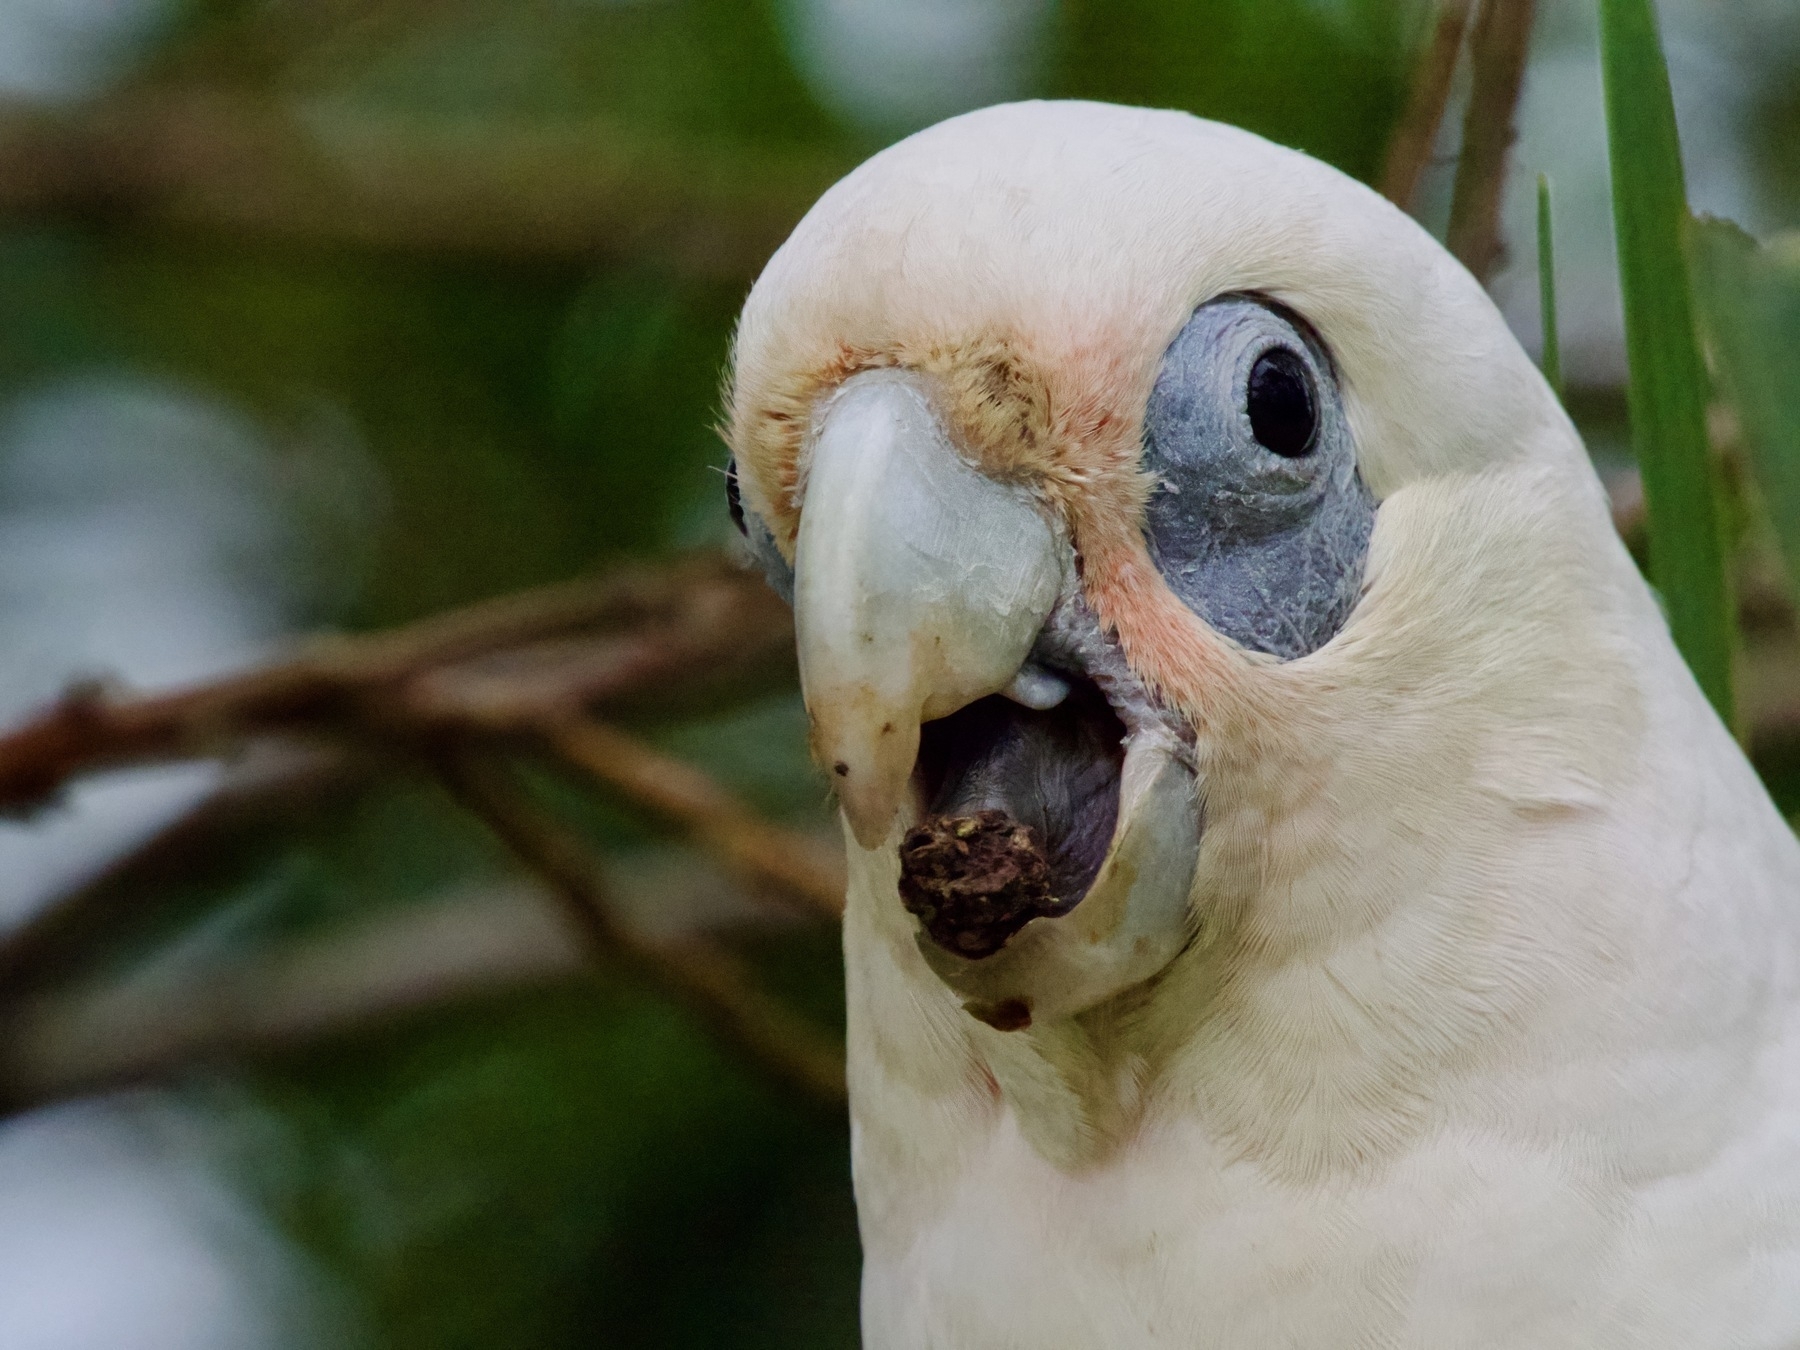 A close-up of a corella, looking surprised with food in its beak.